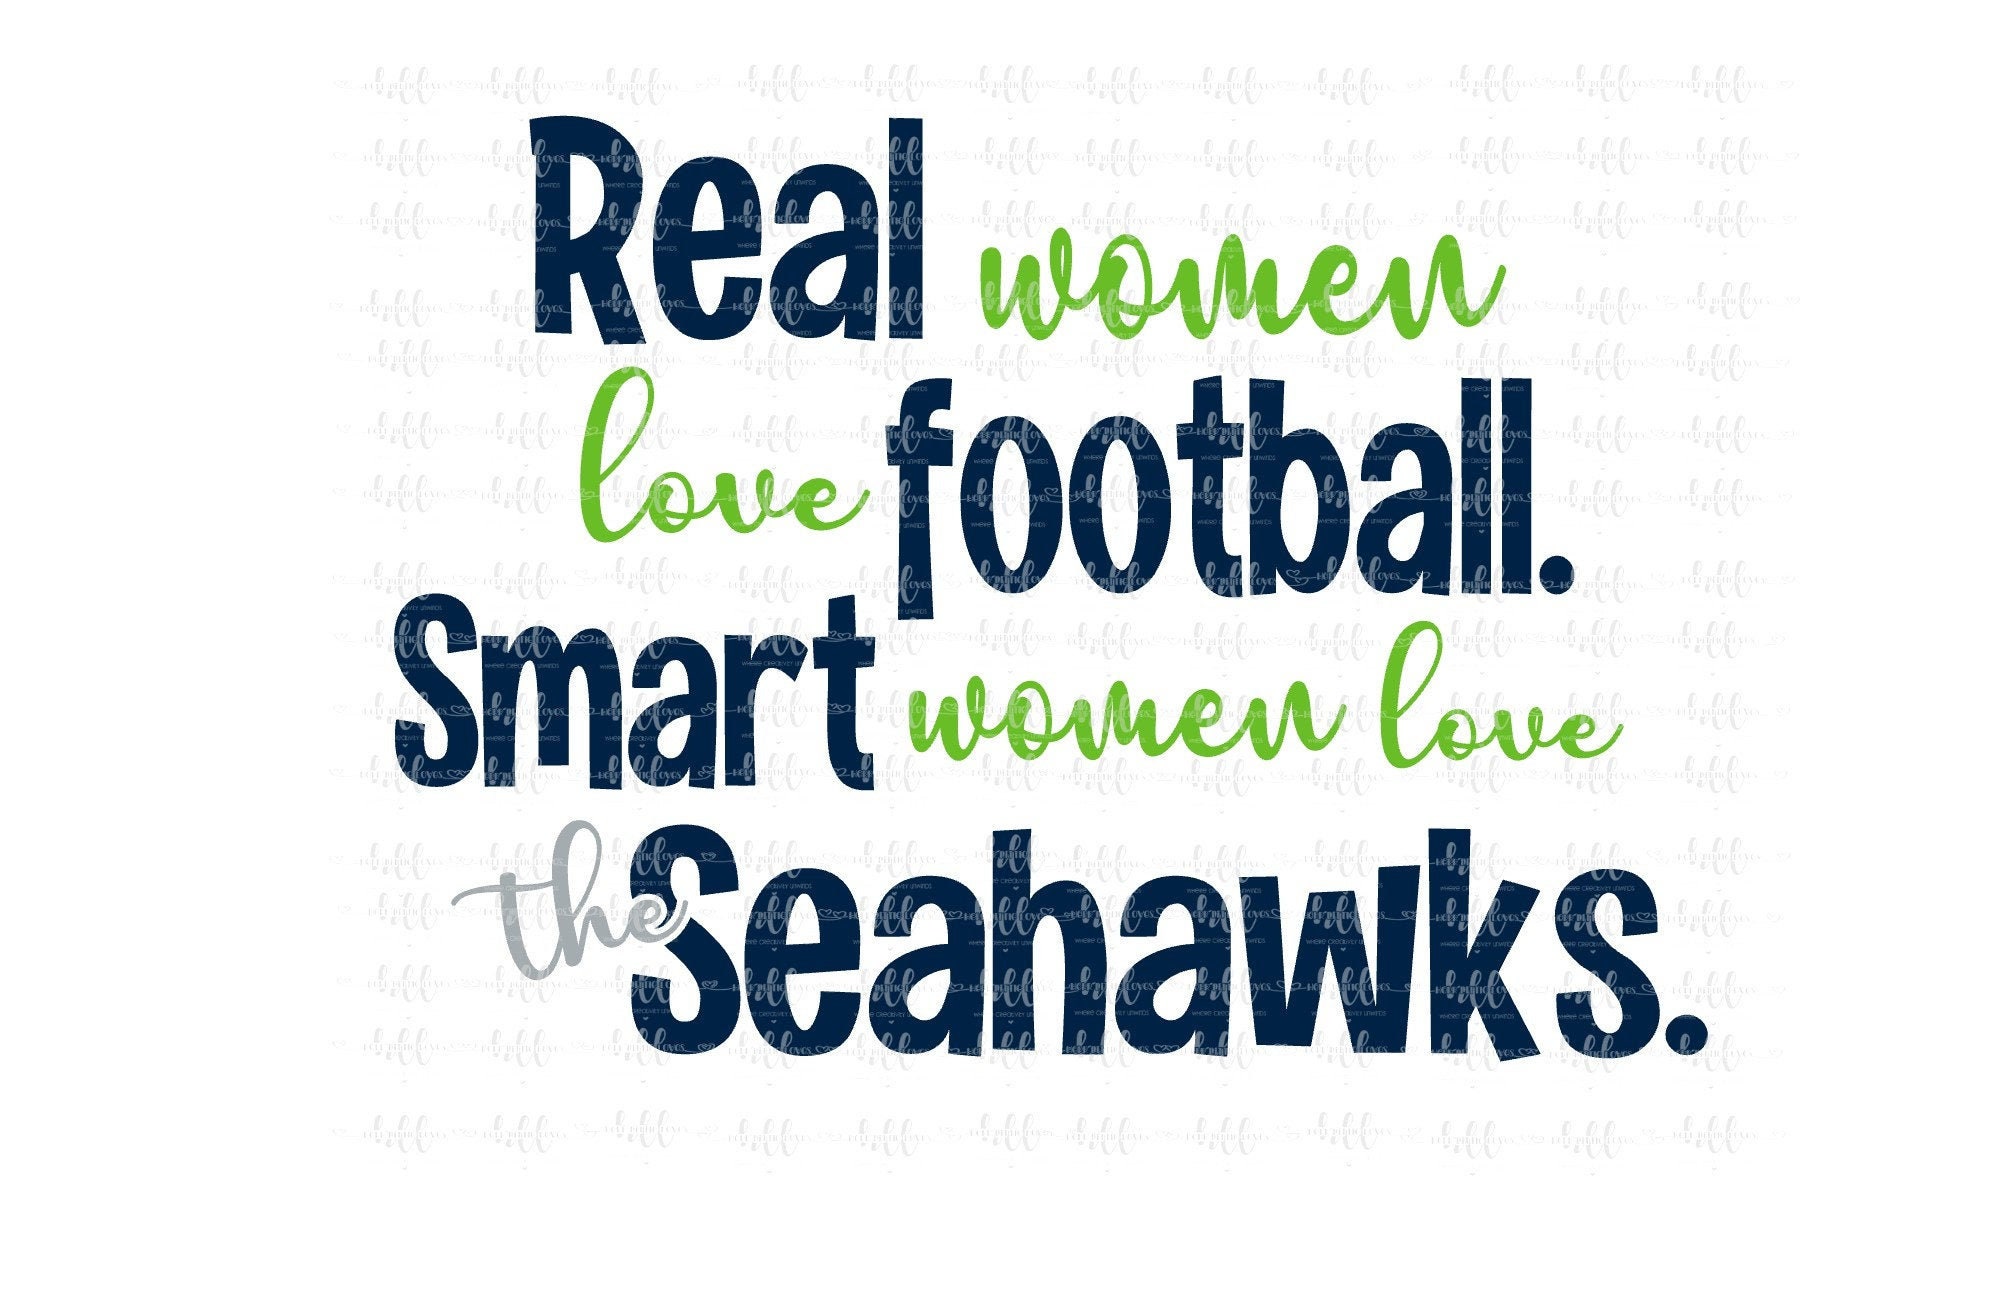 SEATTLE SEAHAWKS NFL VINYL STENCIL FOR CUSTOM SHOES SNEAKERS AND SMALL  PROJECTS